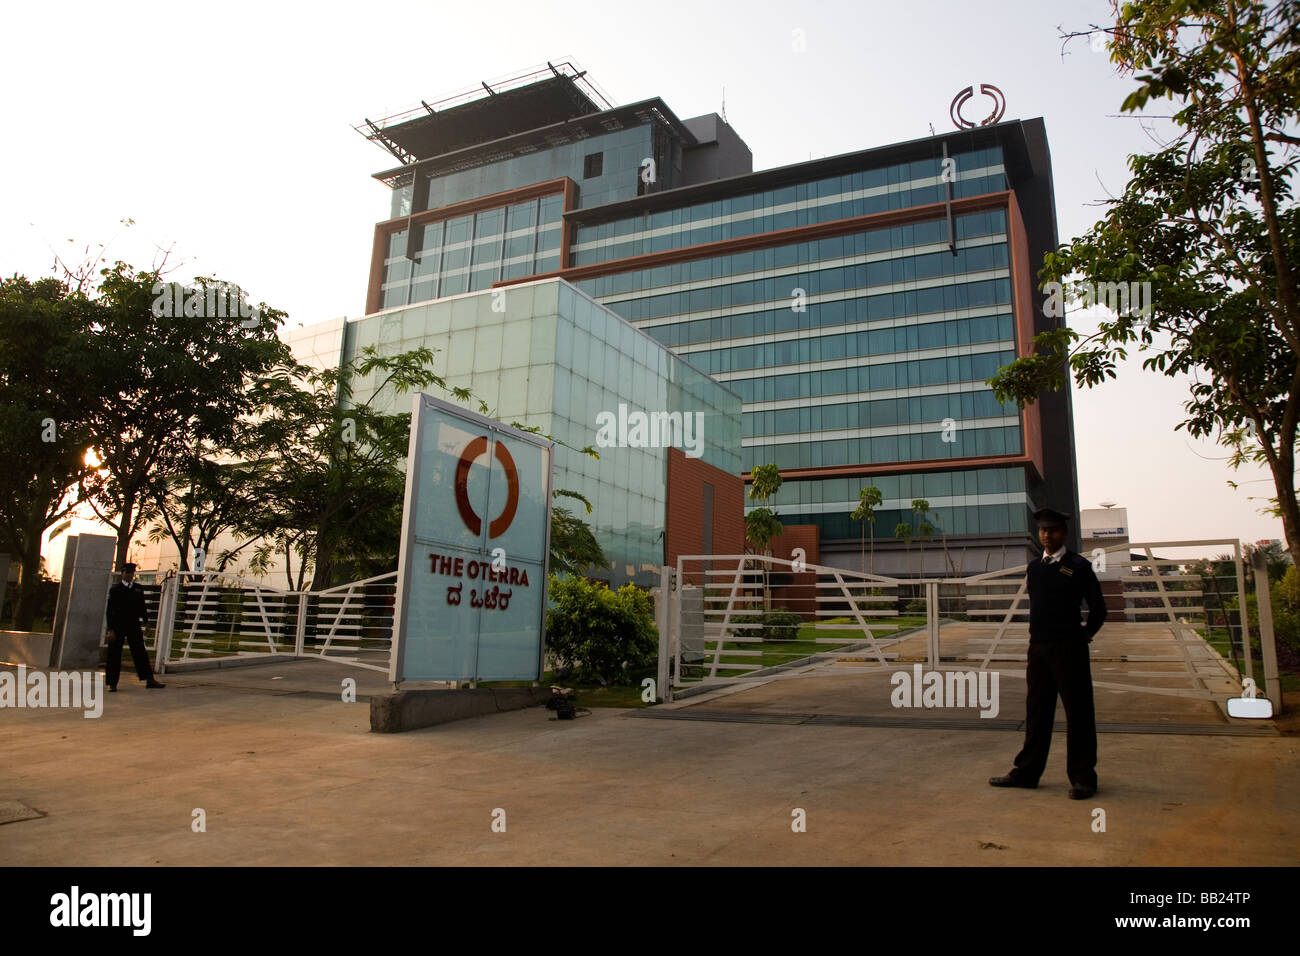 Security guards stand outside of Oterra, one of the modern office buildings within Electronics City, Bangalore. Stock Photo